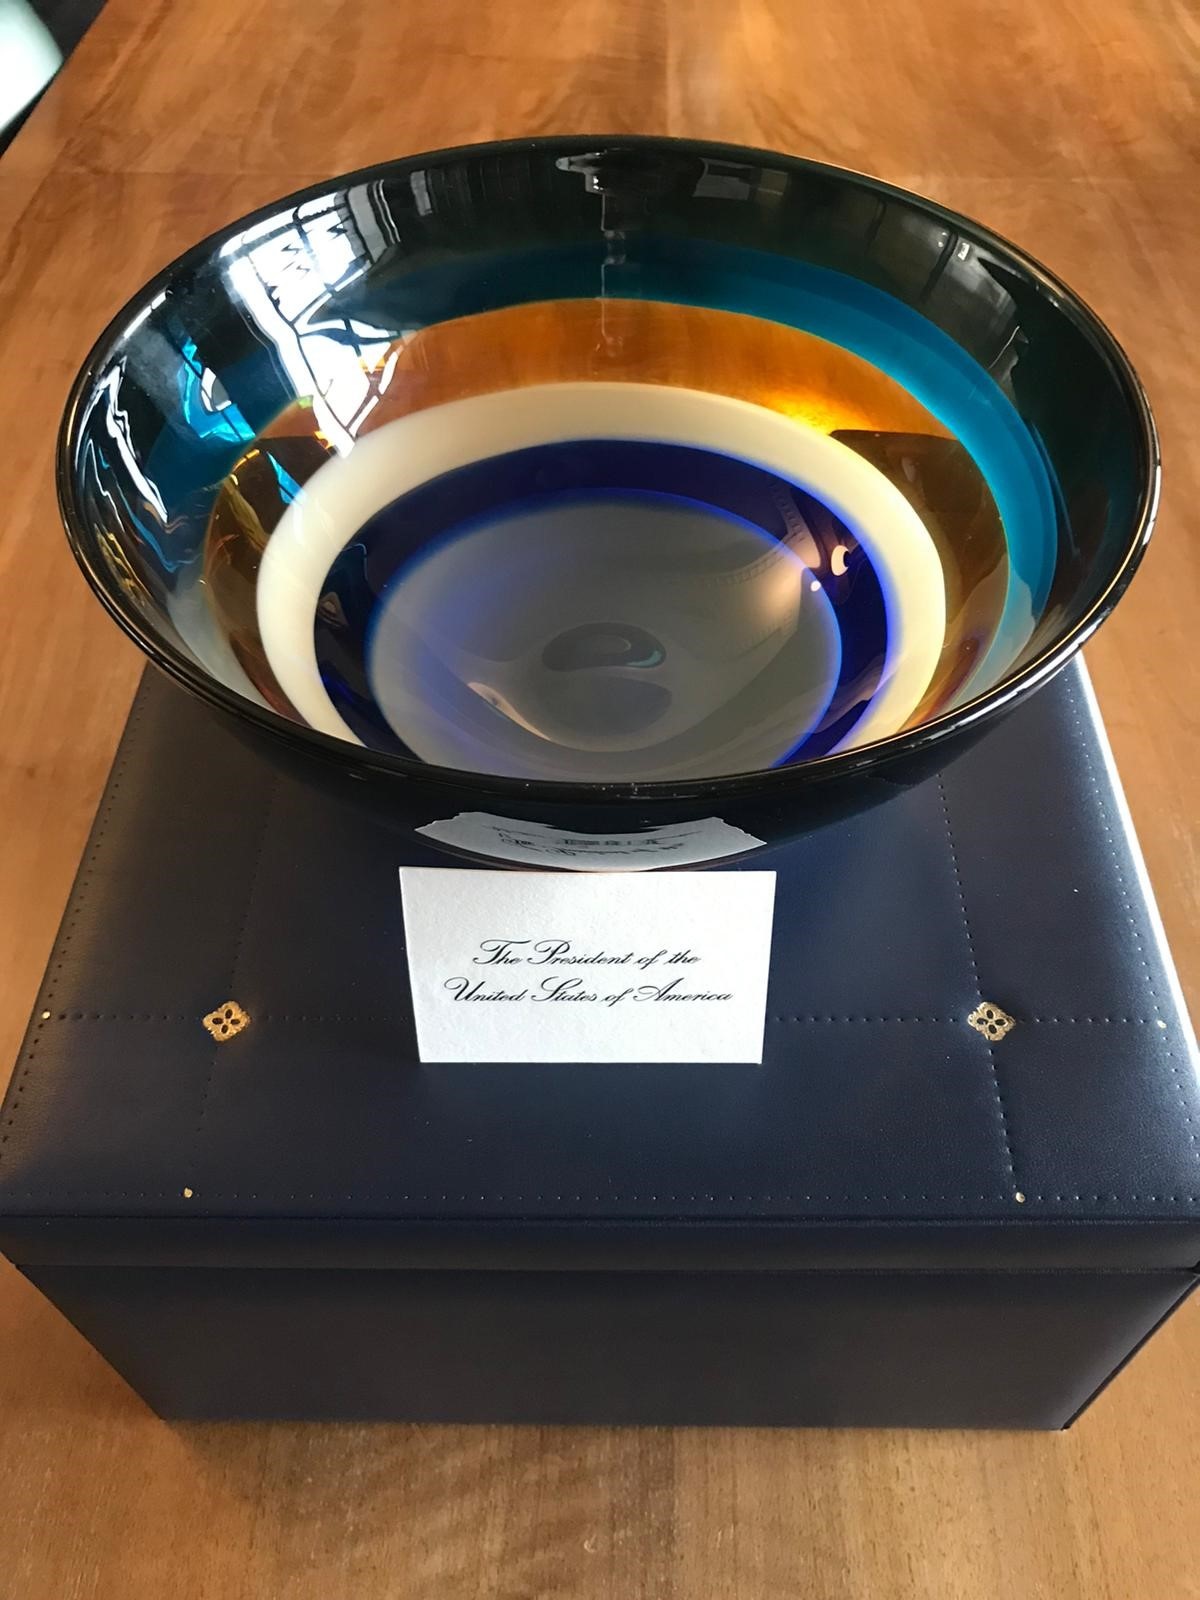 A multi-coloured vase gifted to the people of Scotland from President Biden with an accompanying card reading The President of the United States of America